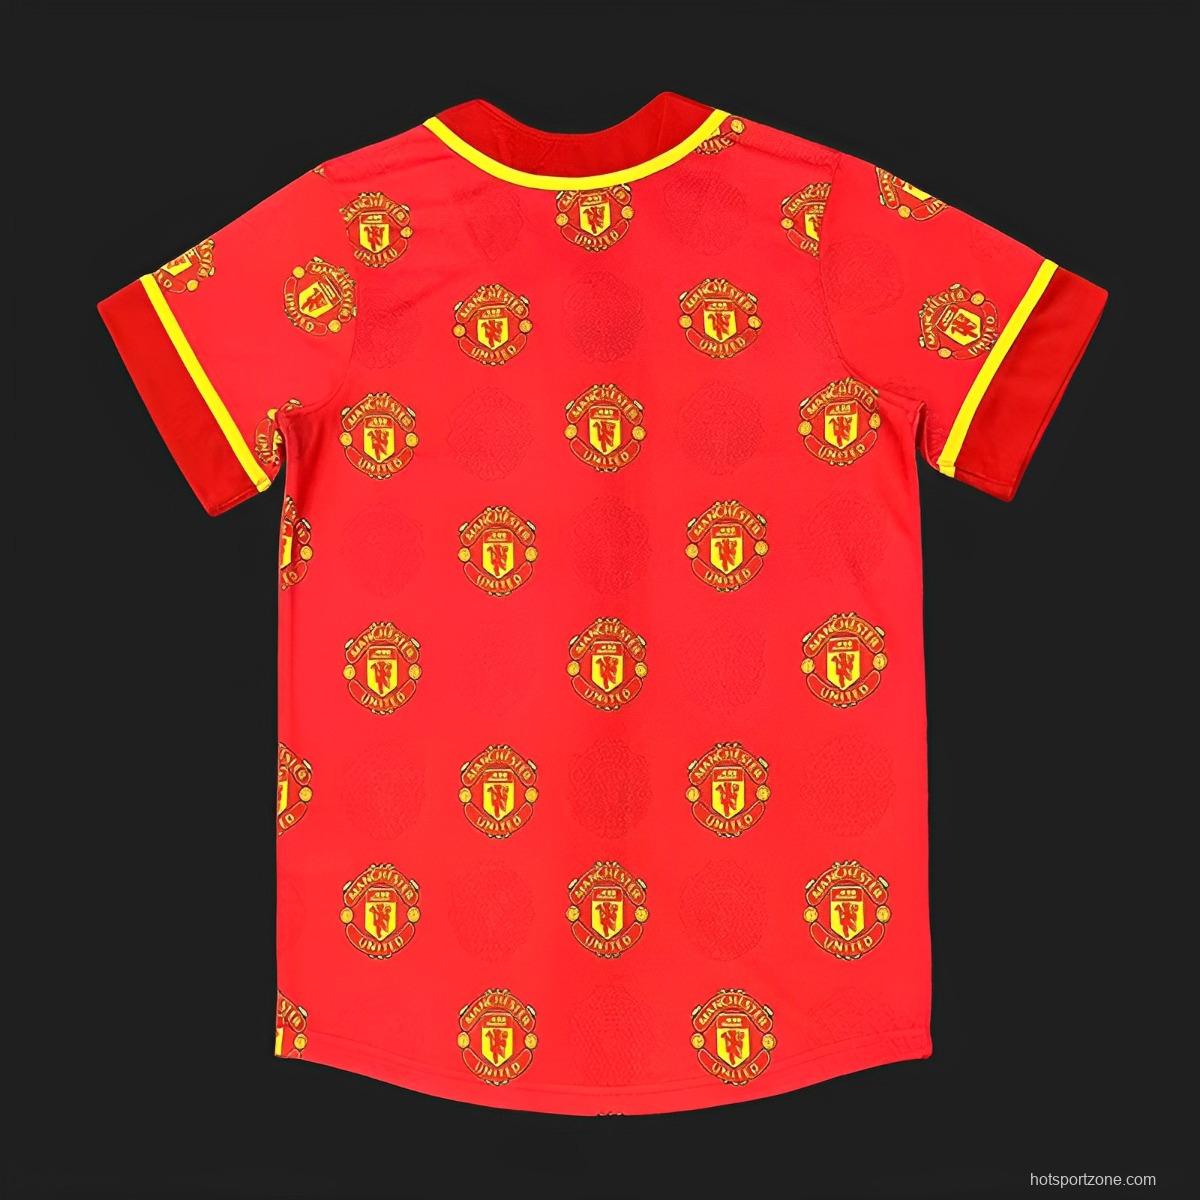 23/24 Manchester United x MLB Special Red Jersey